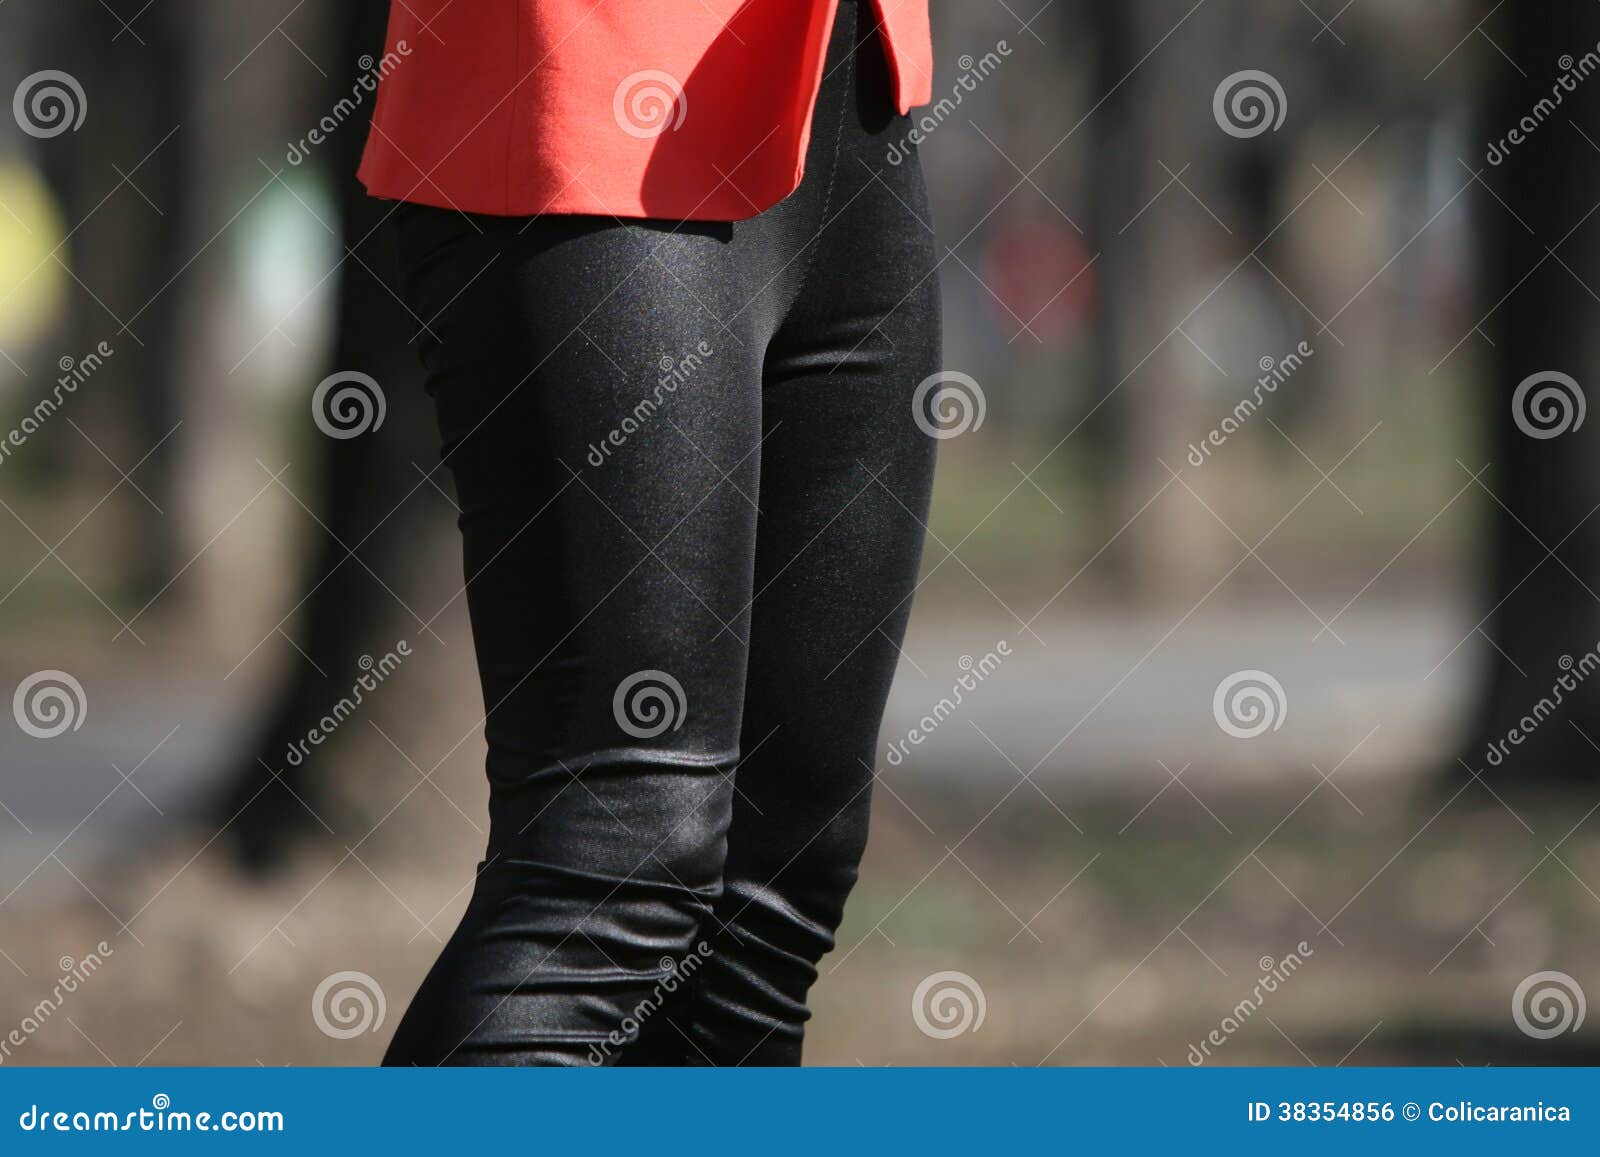 125 Young Girls Wearing Leggings Stock Photos - Free & Royalty-Free Stock  Photos from Dreamstime